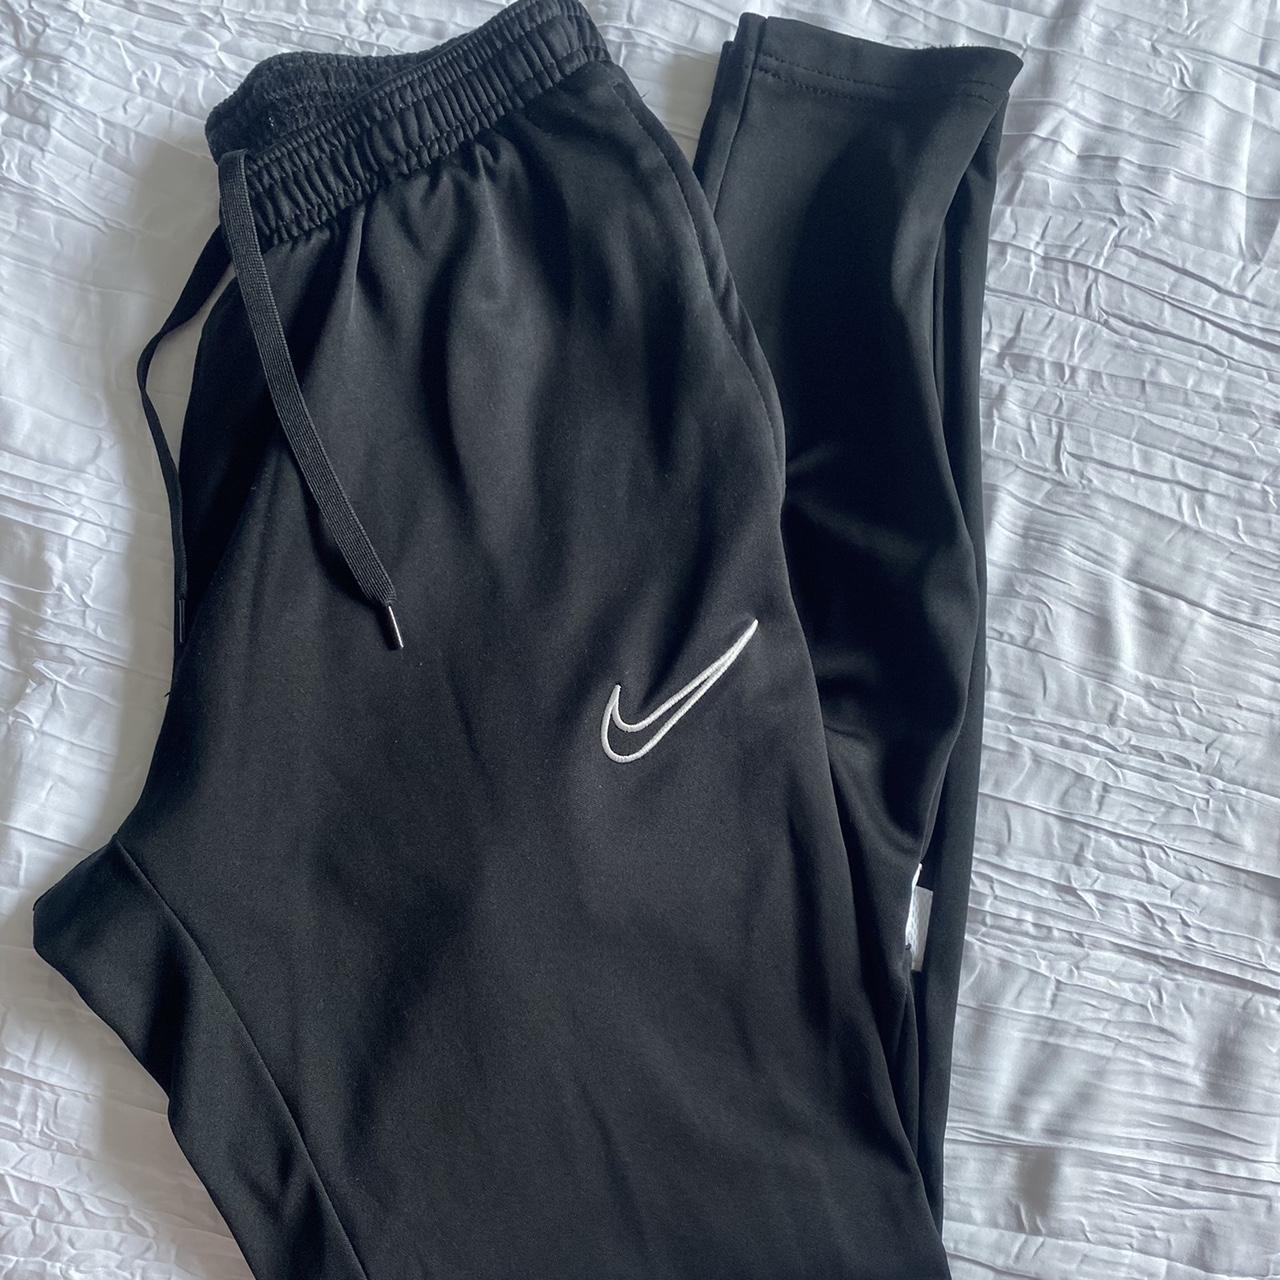 Men’s Nike joggers in size S perfect condition #nike... - Depop